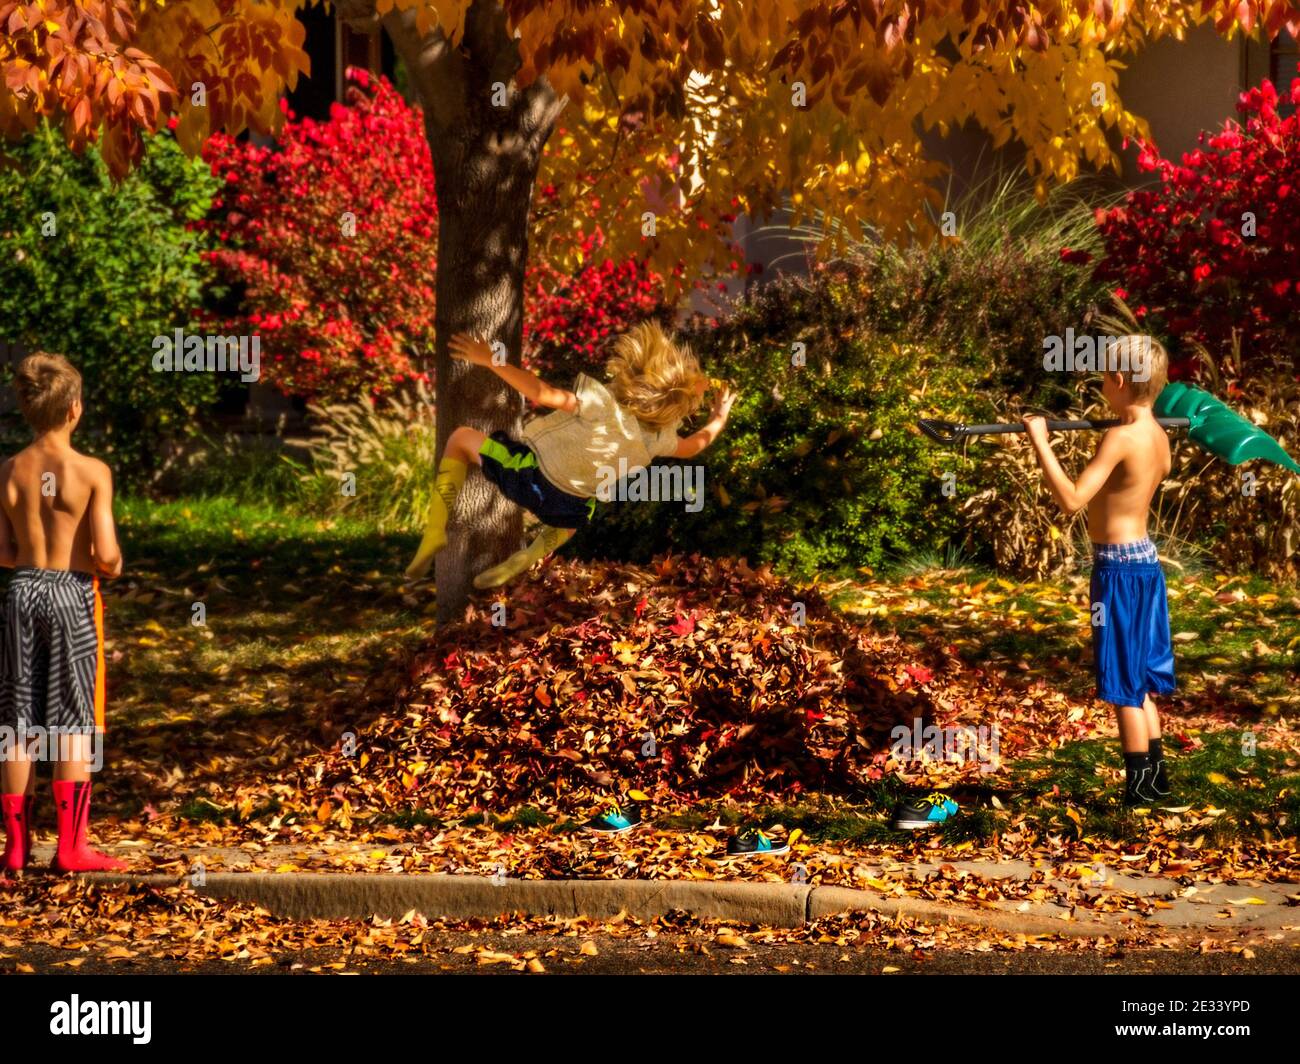 Child jumps from tree into a pile of autumn leaves. Stock Photo